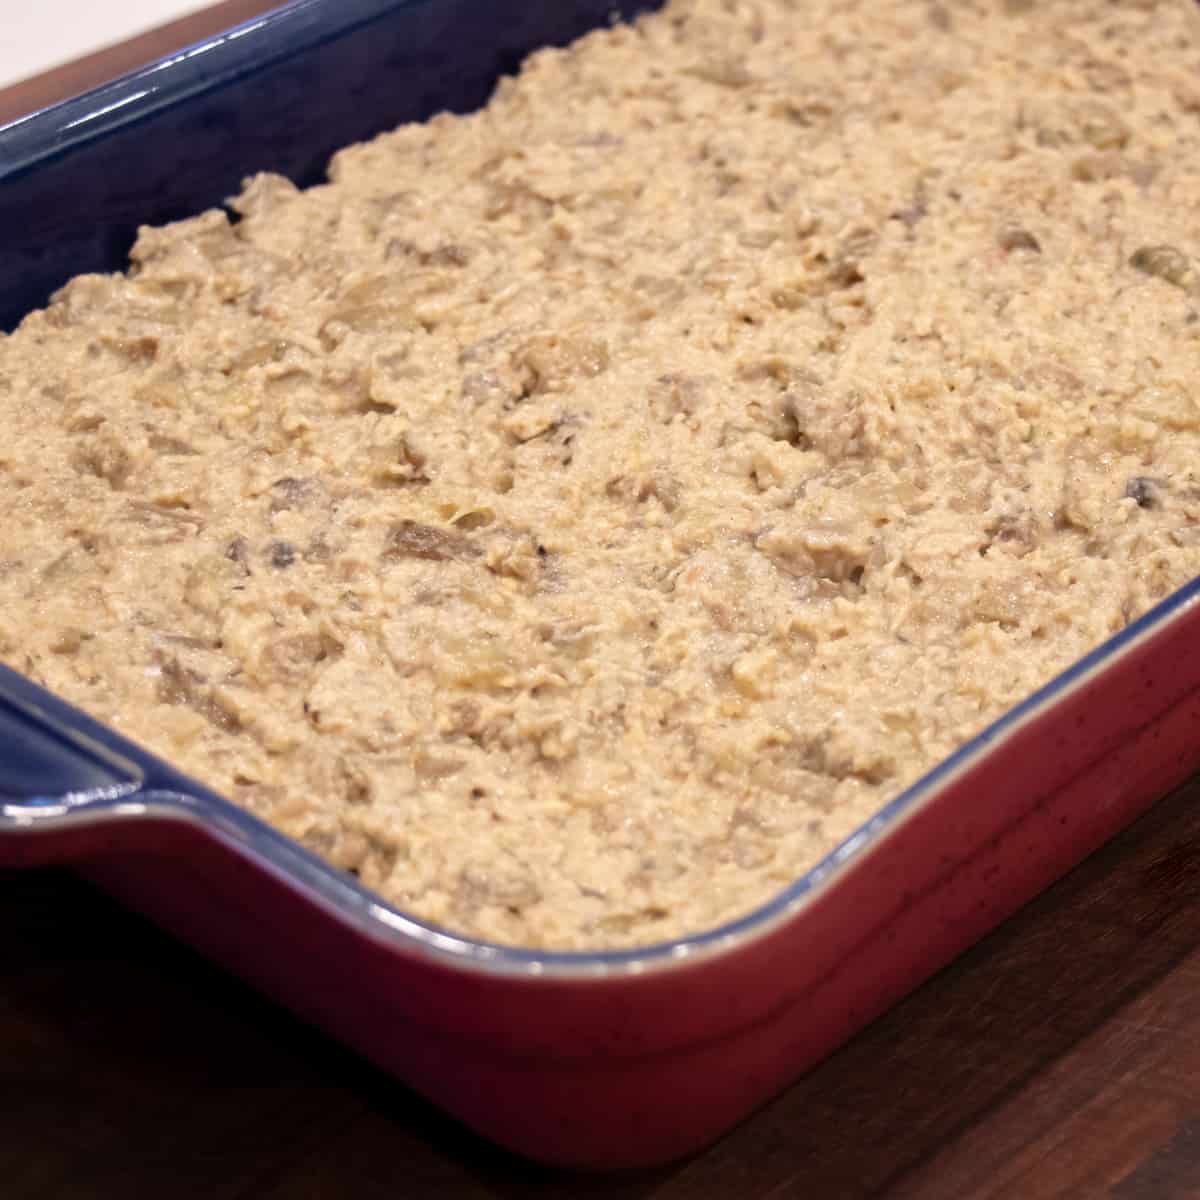 Bottom layer of casserole spread in a baking dish.